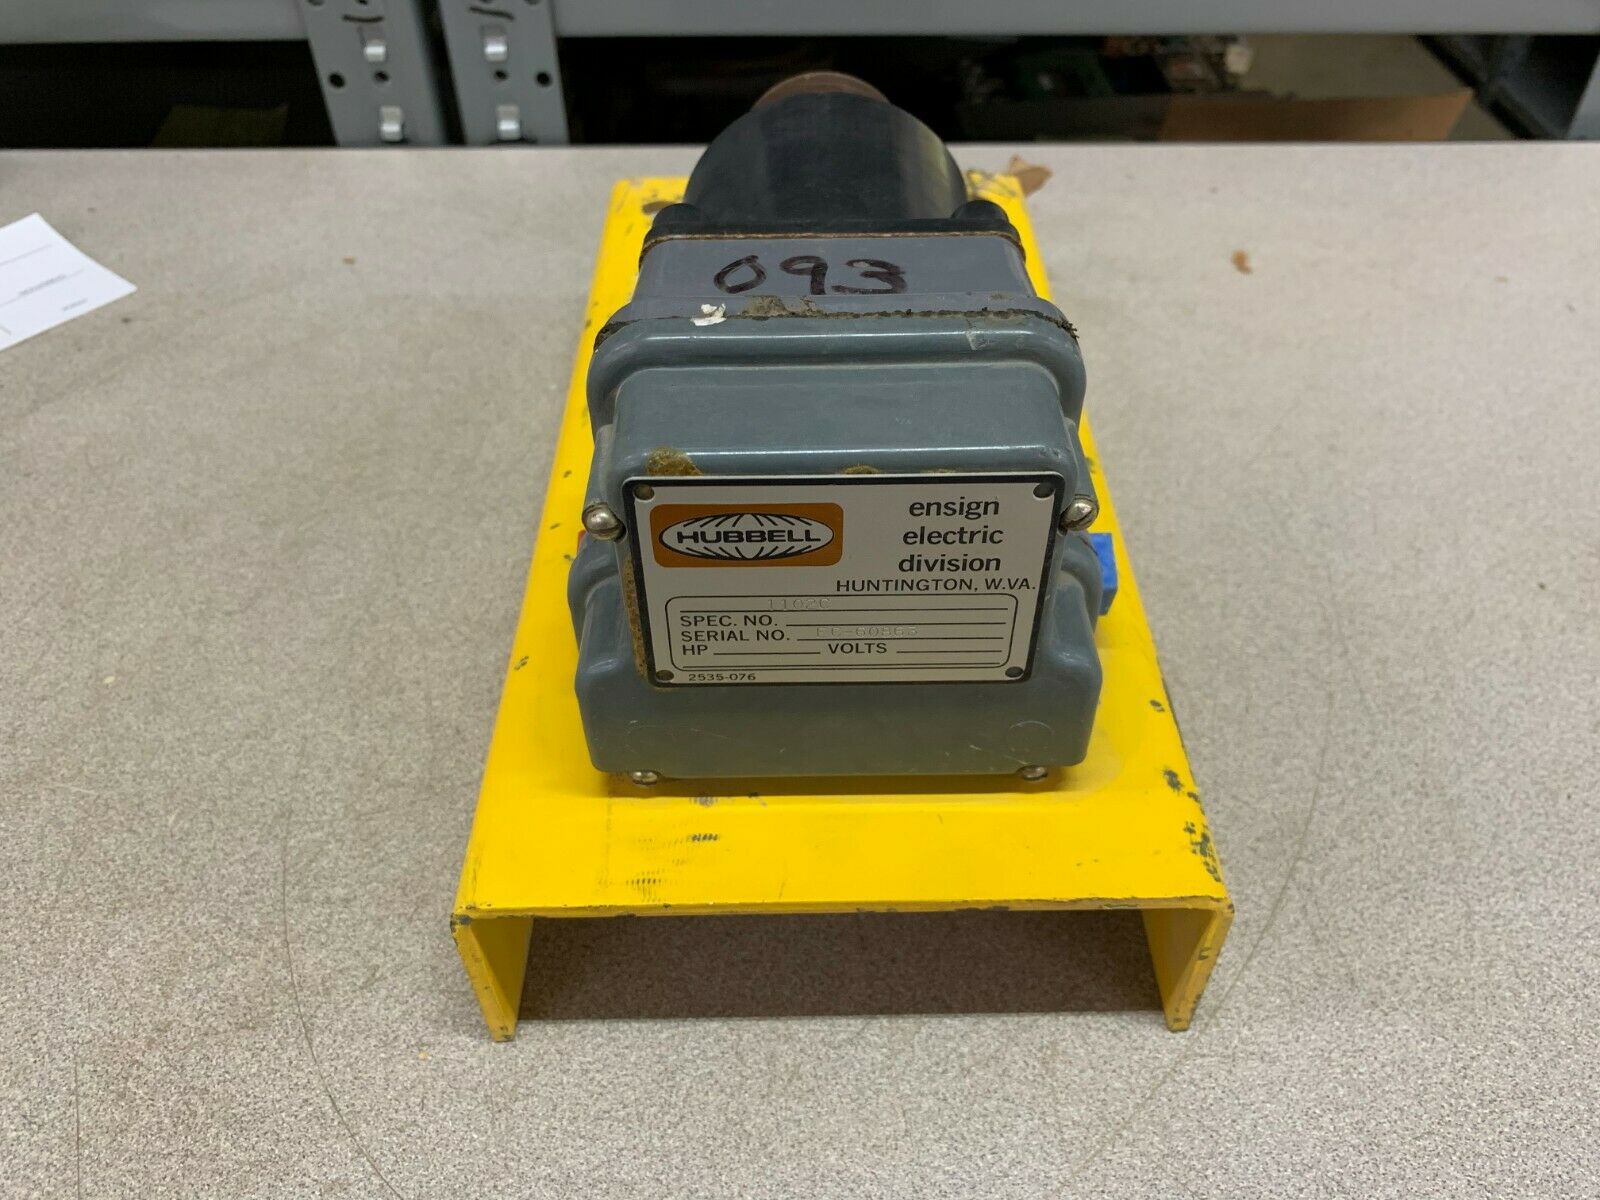 USED HUBBELL ENSIGN ELECTRIC DIVISION SWITCH 1102C